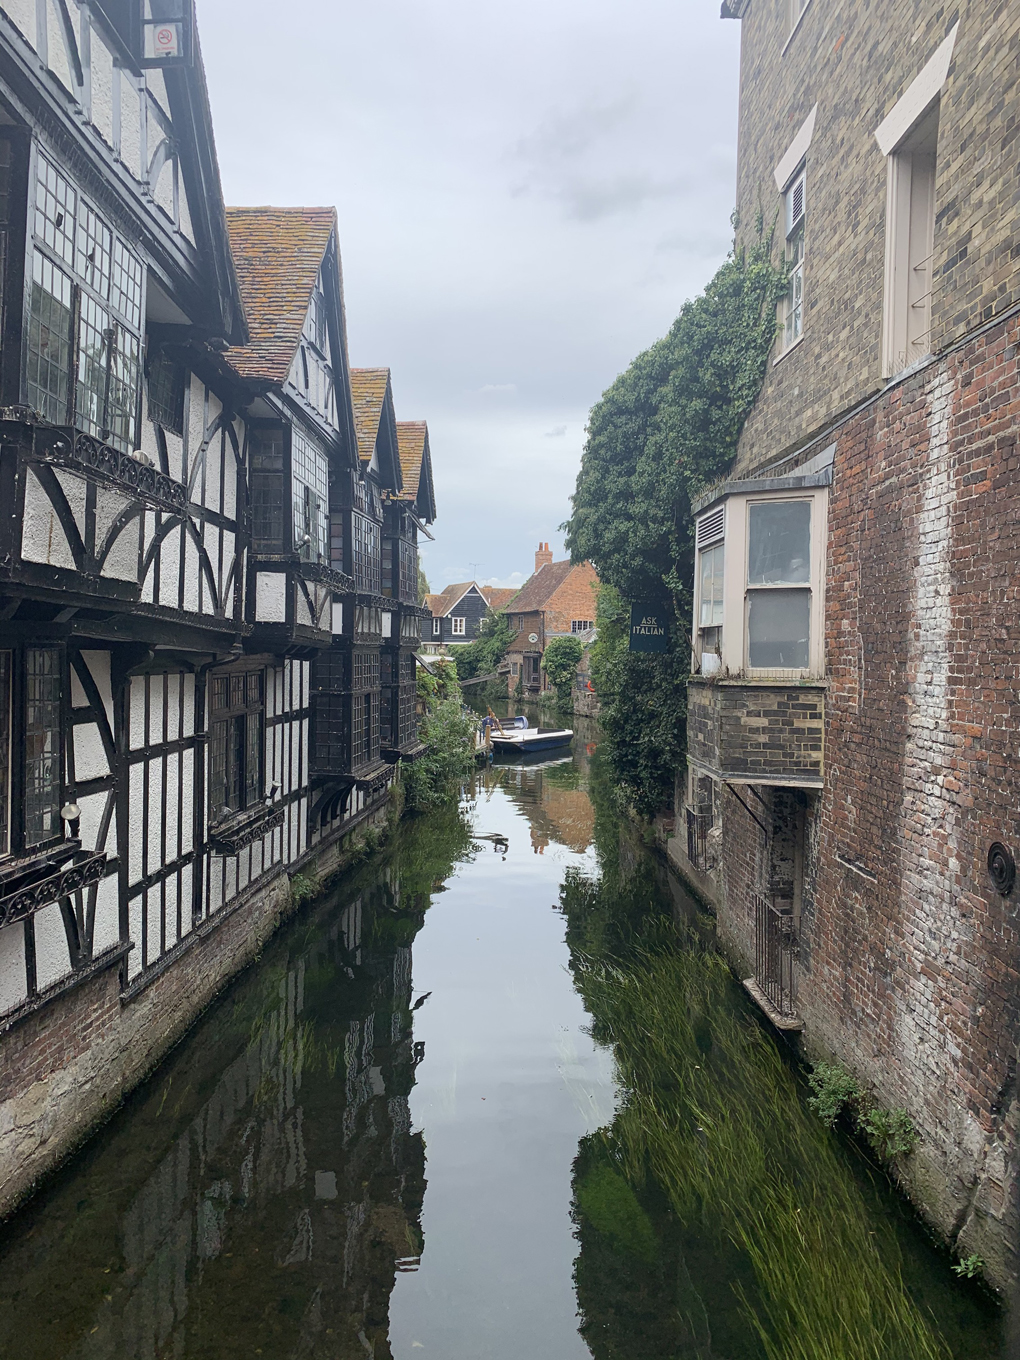 houses built right up to a canal on both sides